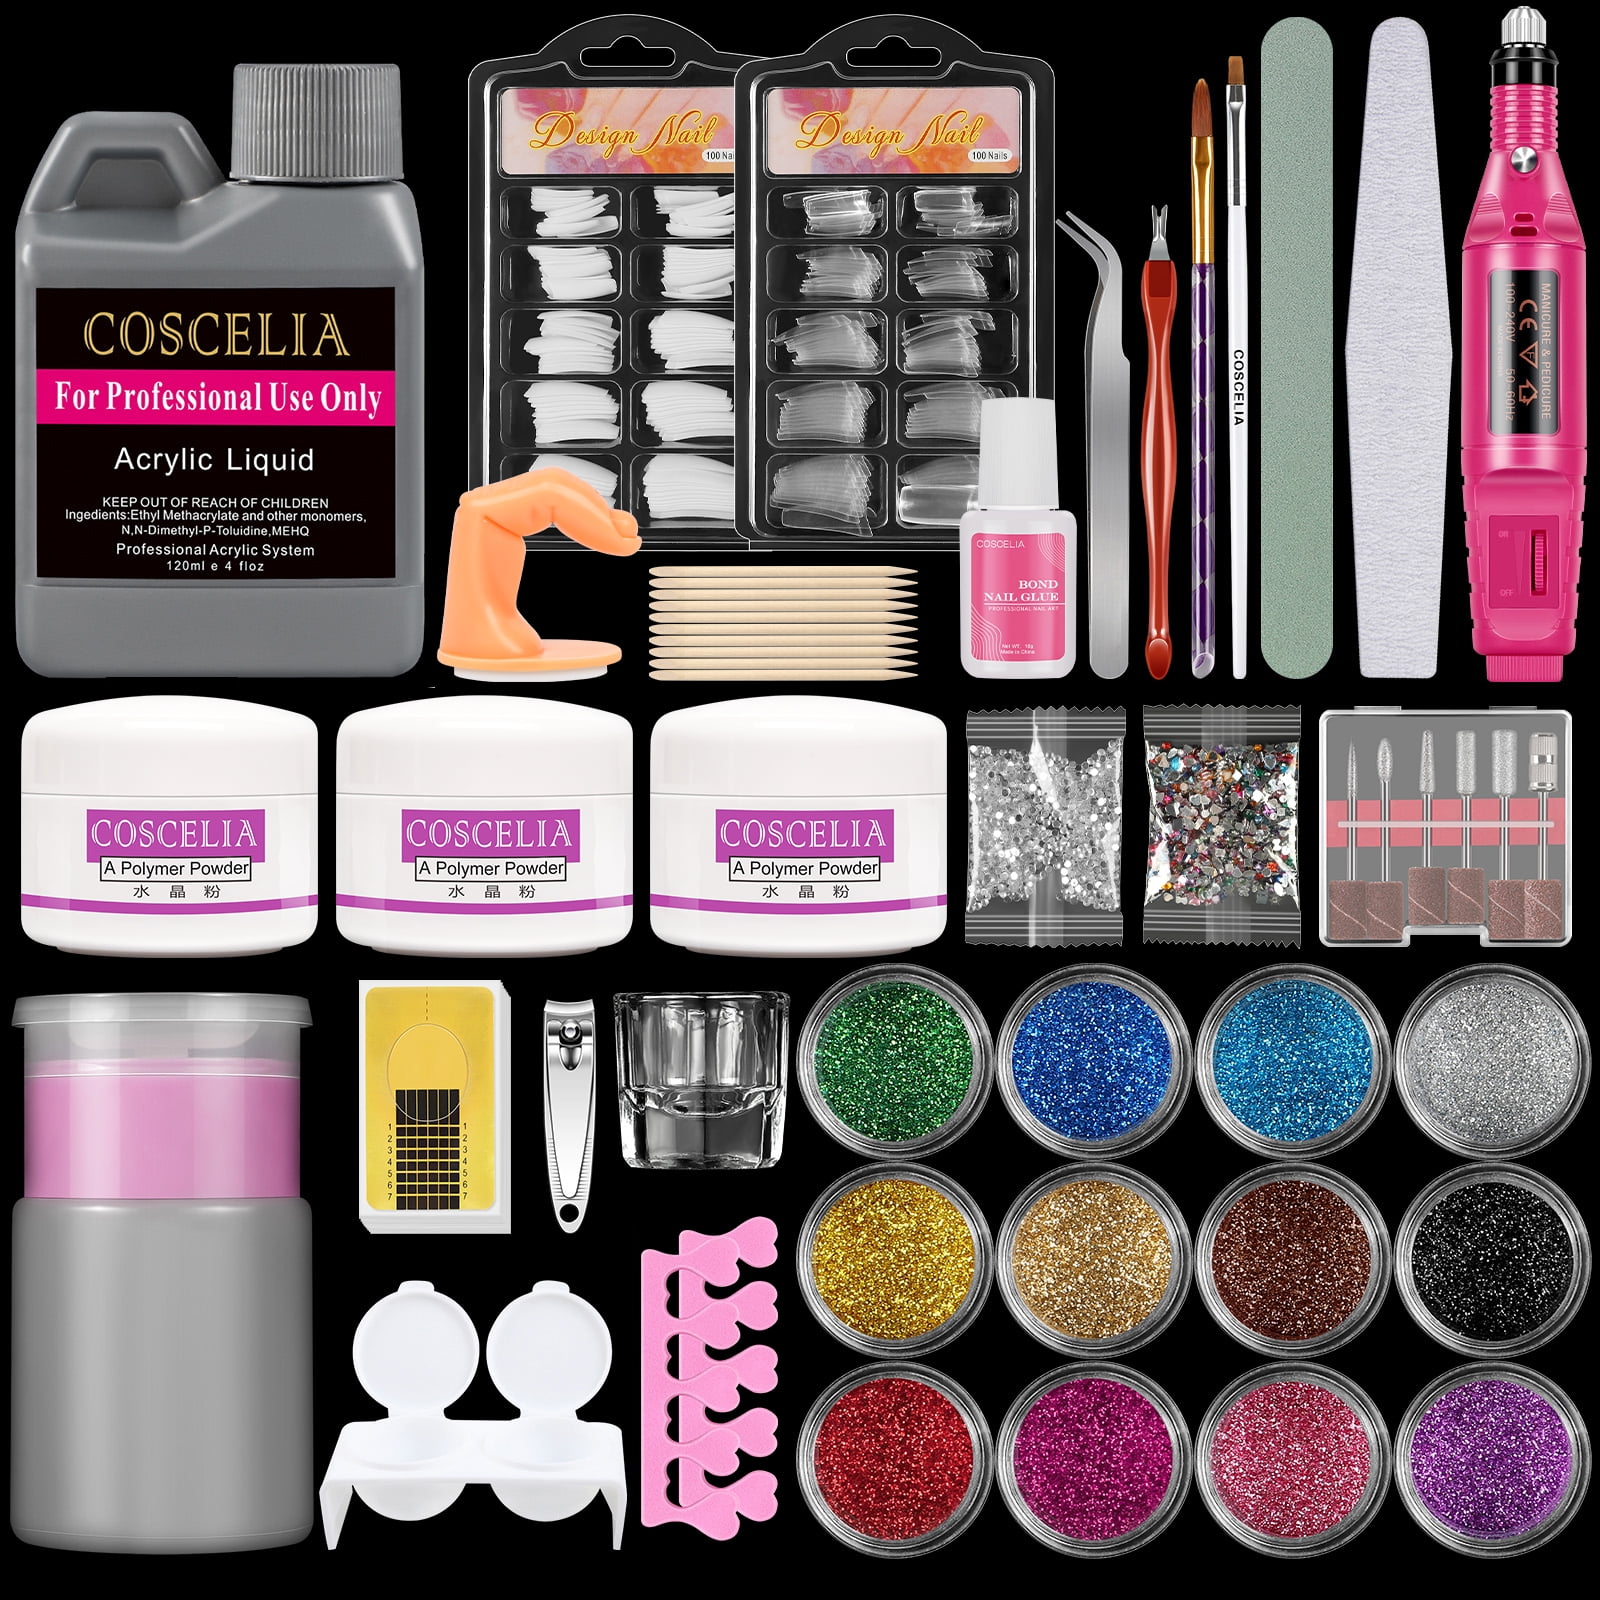 Coscelia Acrylic Nail Kit with Drill 15 Colors Glitter, Acrylic Liquid and Powder for Nail Extension - image 1 of 11